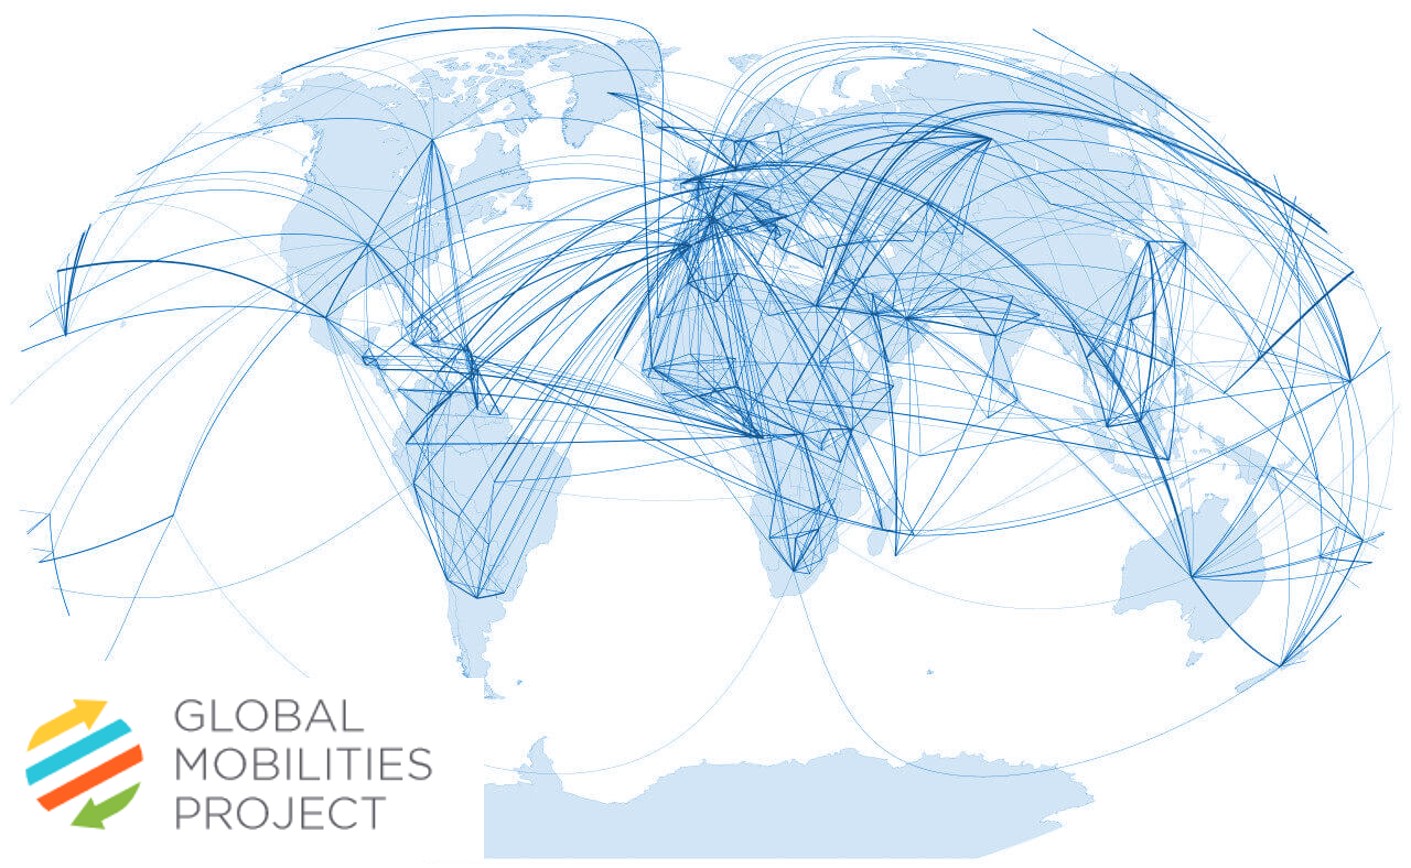 Picture: Global Mobilities Project (https://migrationpolicycentre.eu/projects/global-mobilities-project/).